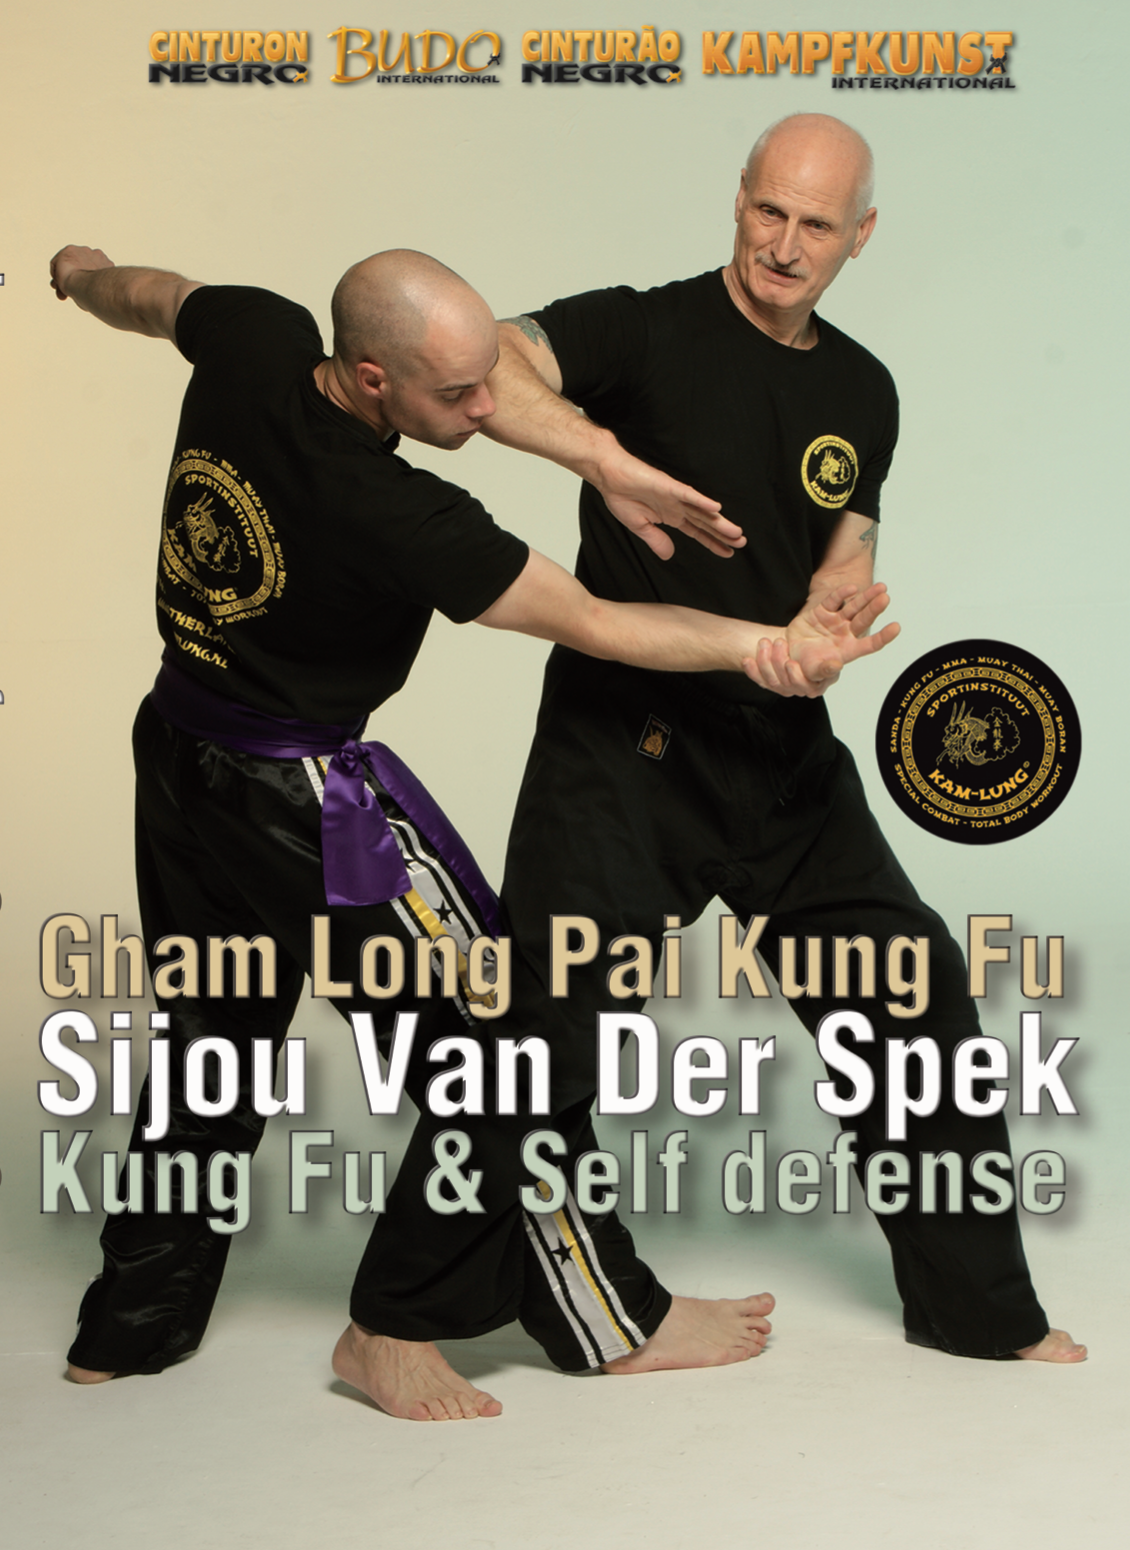 Gham Long Pai Kung Fu and Self Defense DVD by Sijou Van Der Speck - Budovideos